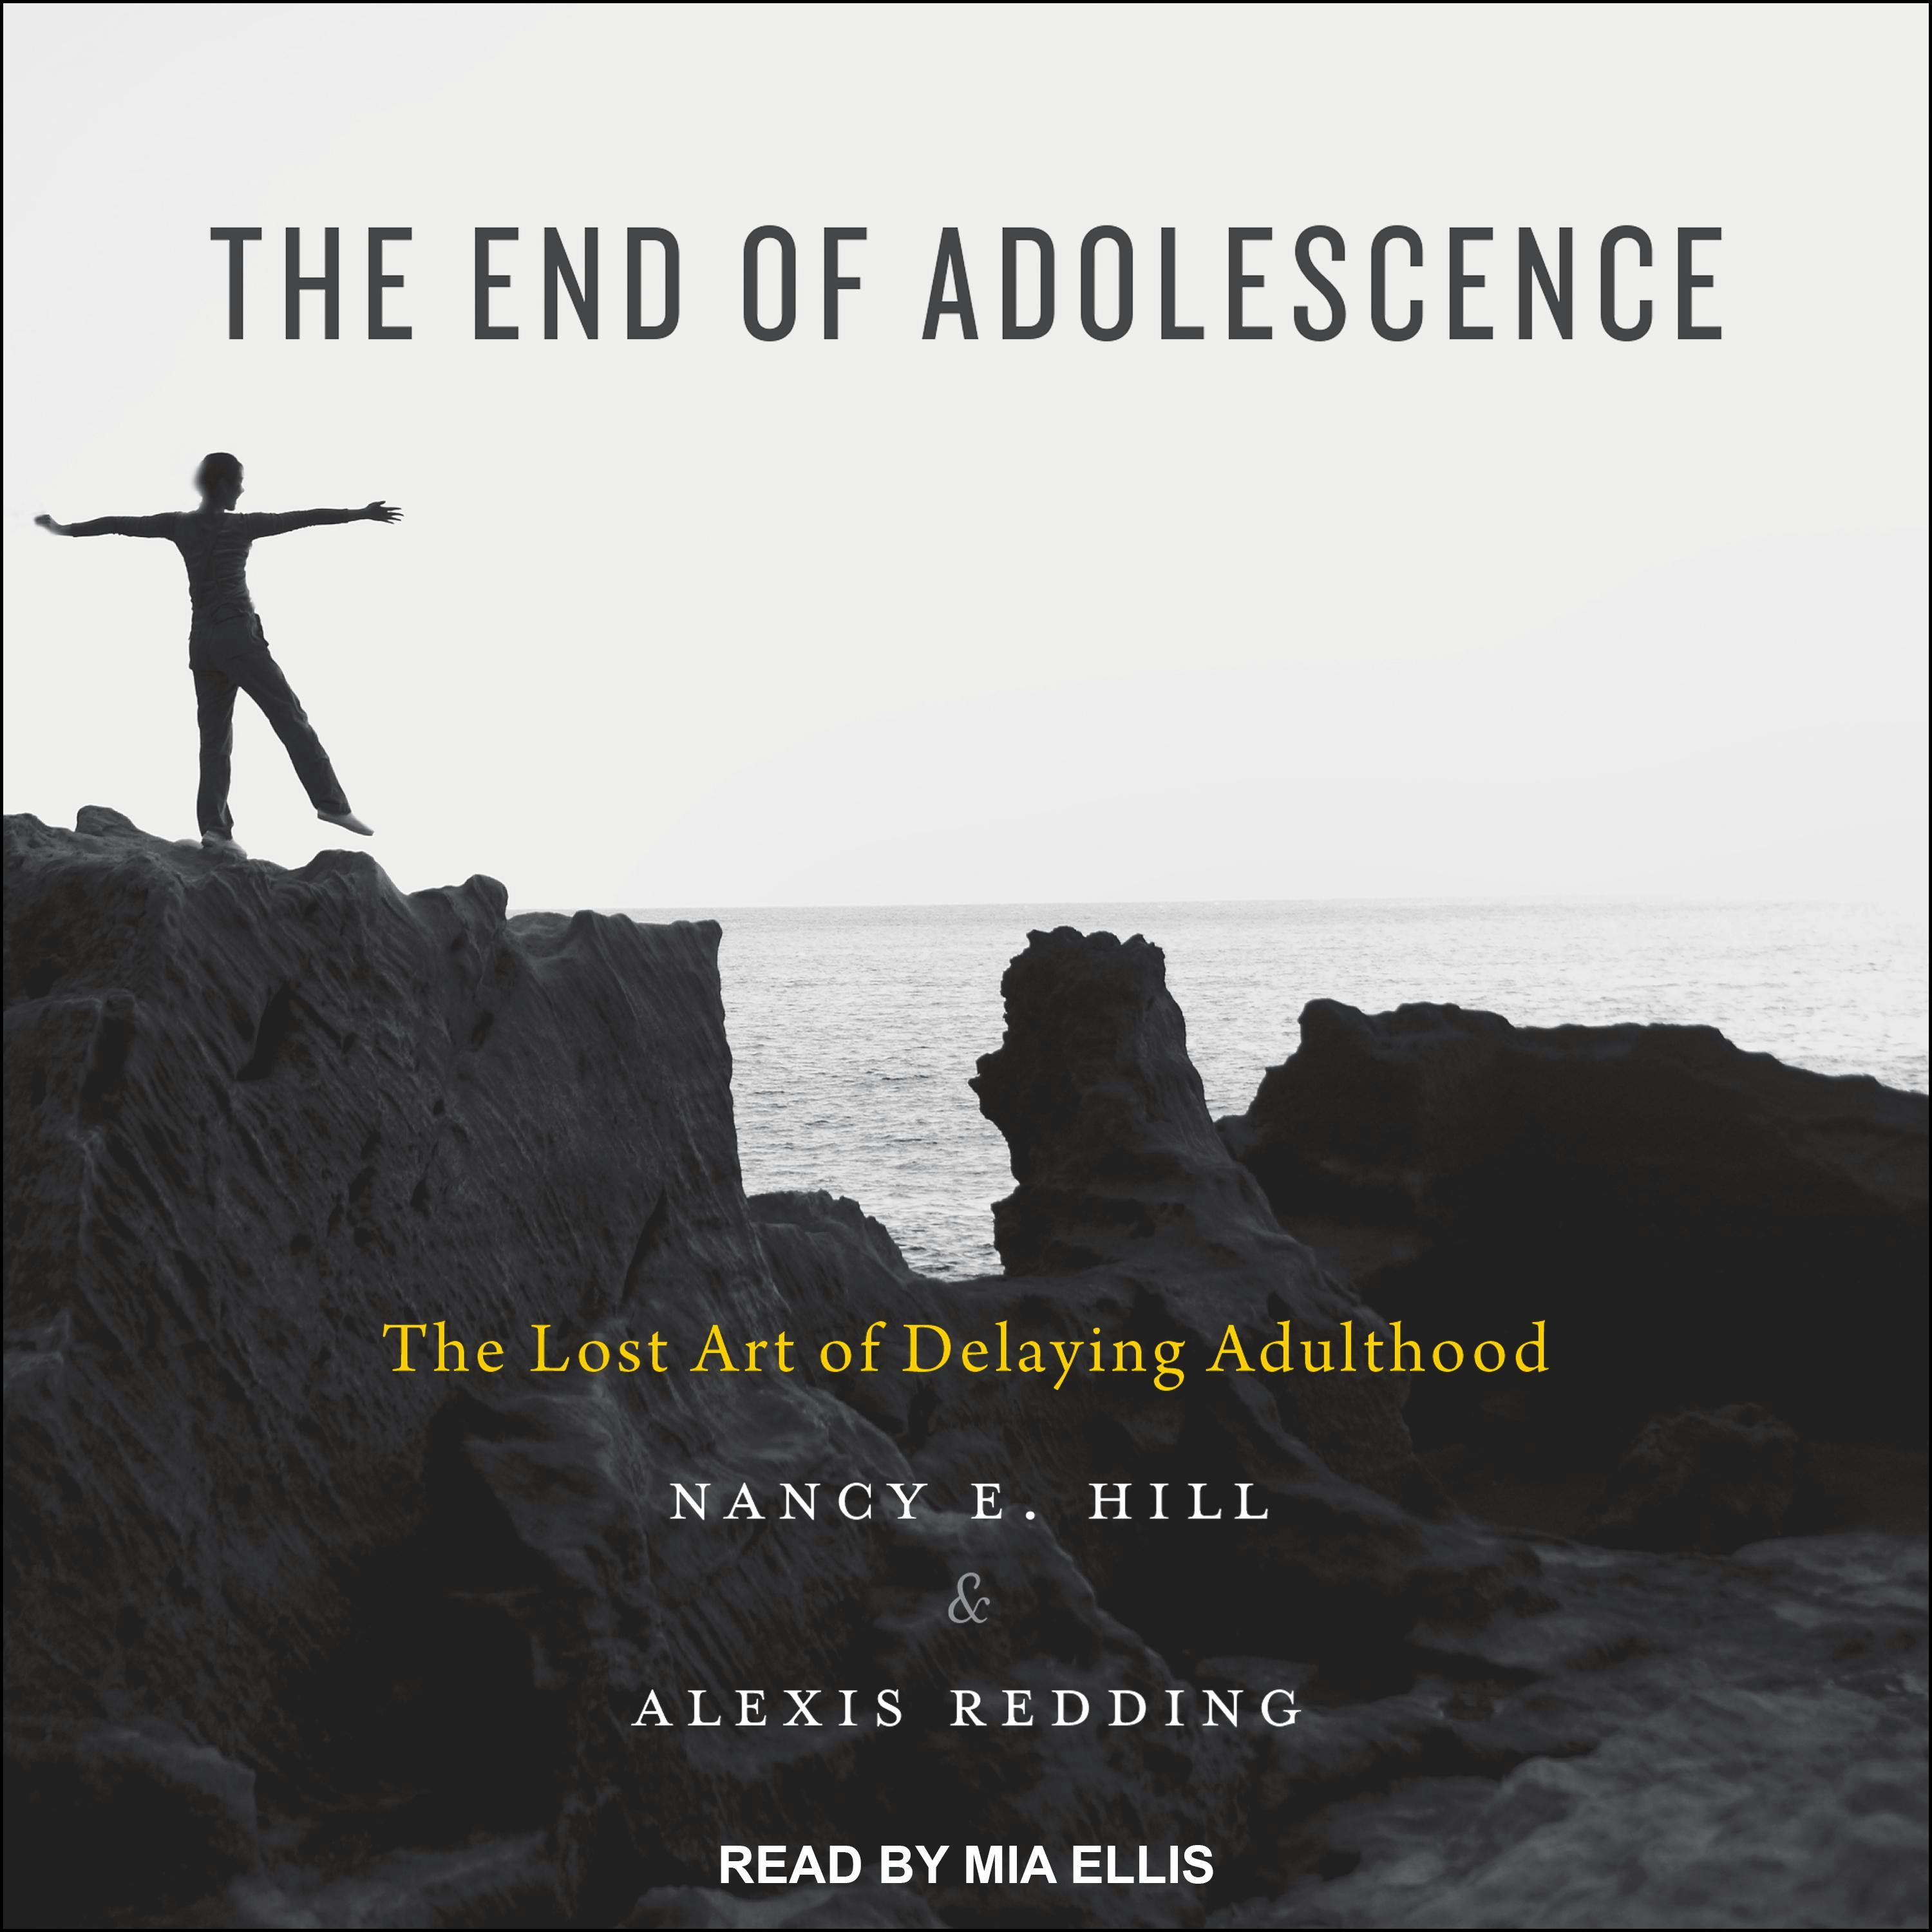 The End of Adolescence: The Lost Art of Delaying Adulthood - Alexis Redding, Nancy E. Hill